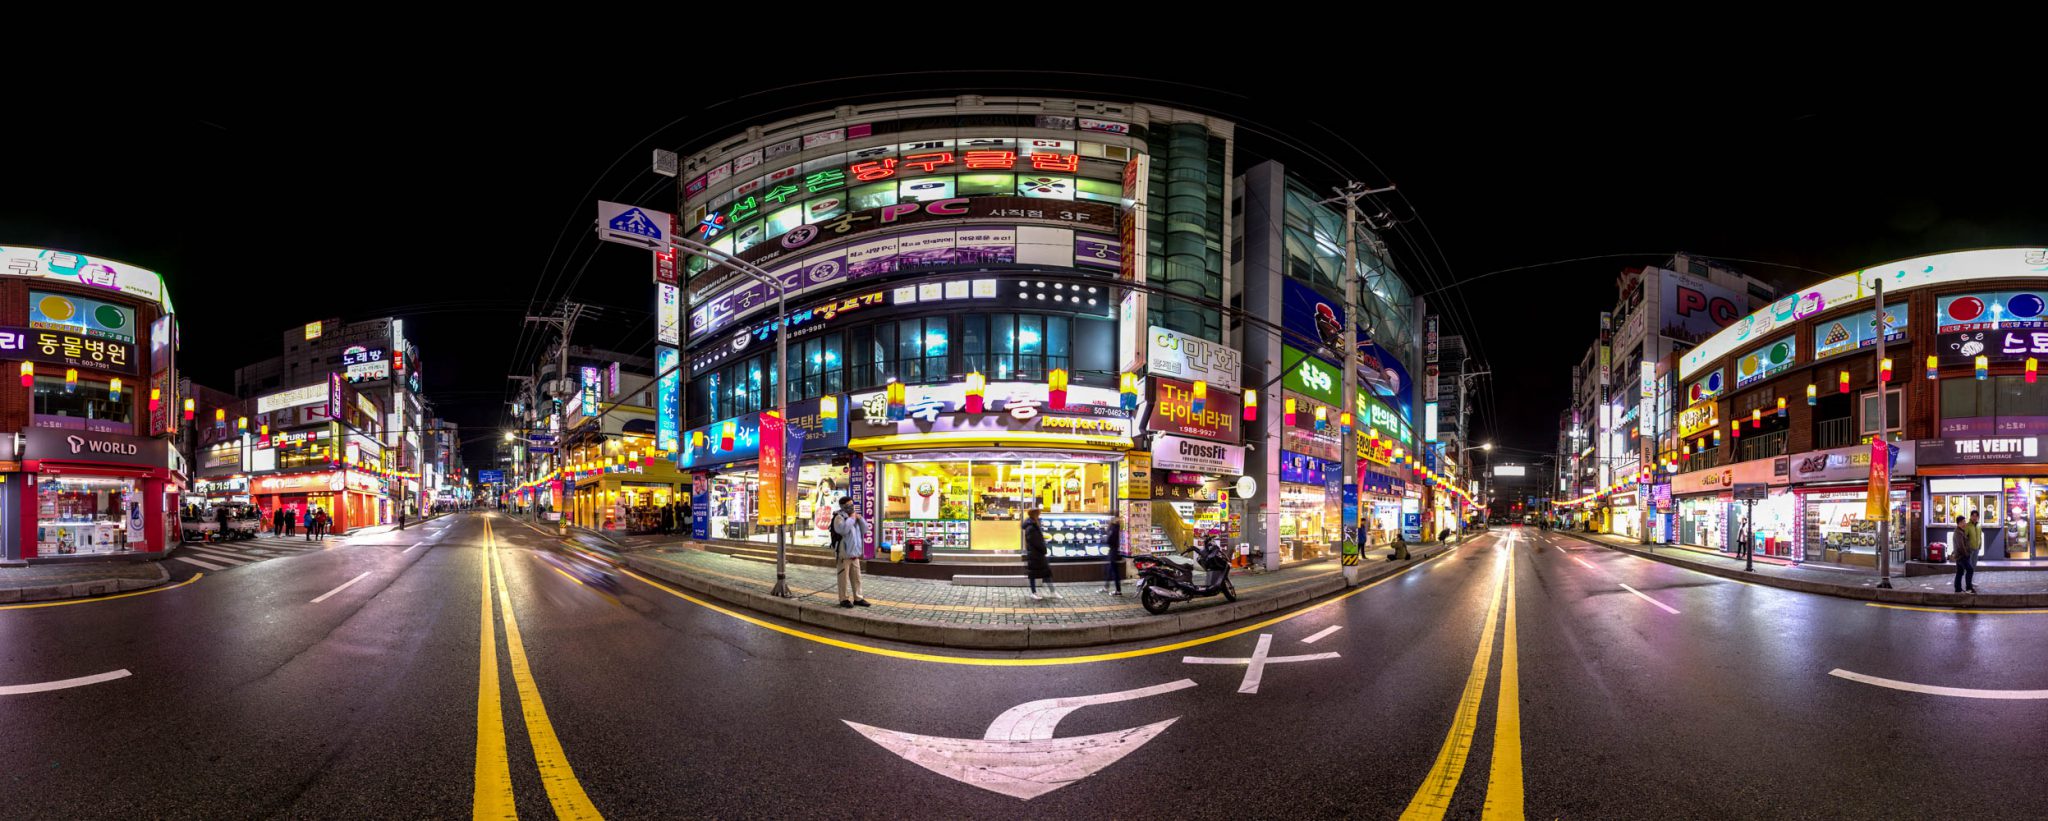 360 photo from the middle of a street lined with shops with brightly coloured signs and advertisments in South Korea.